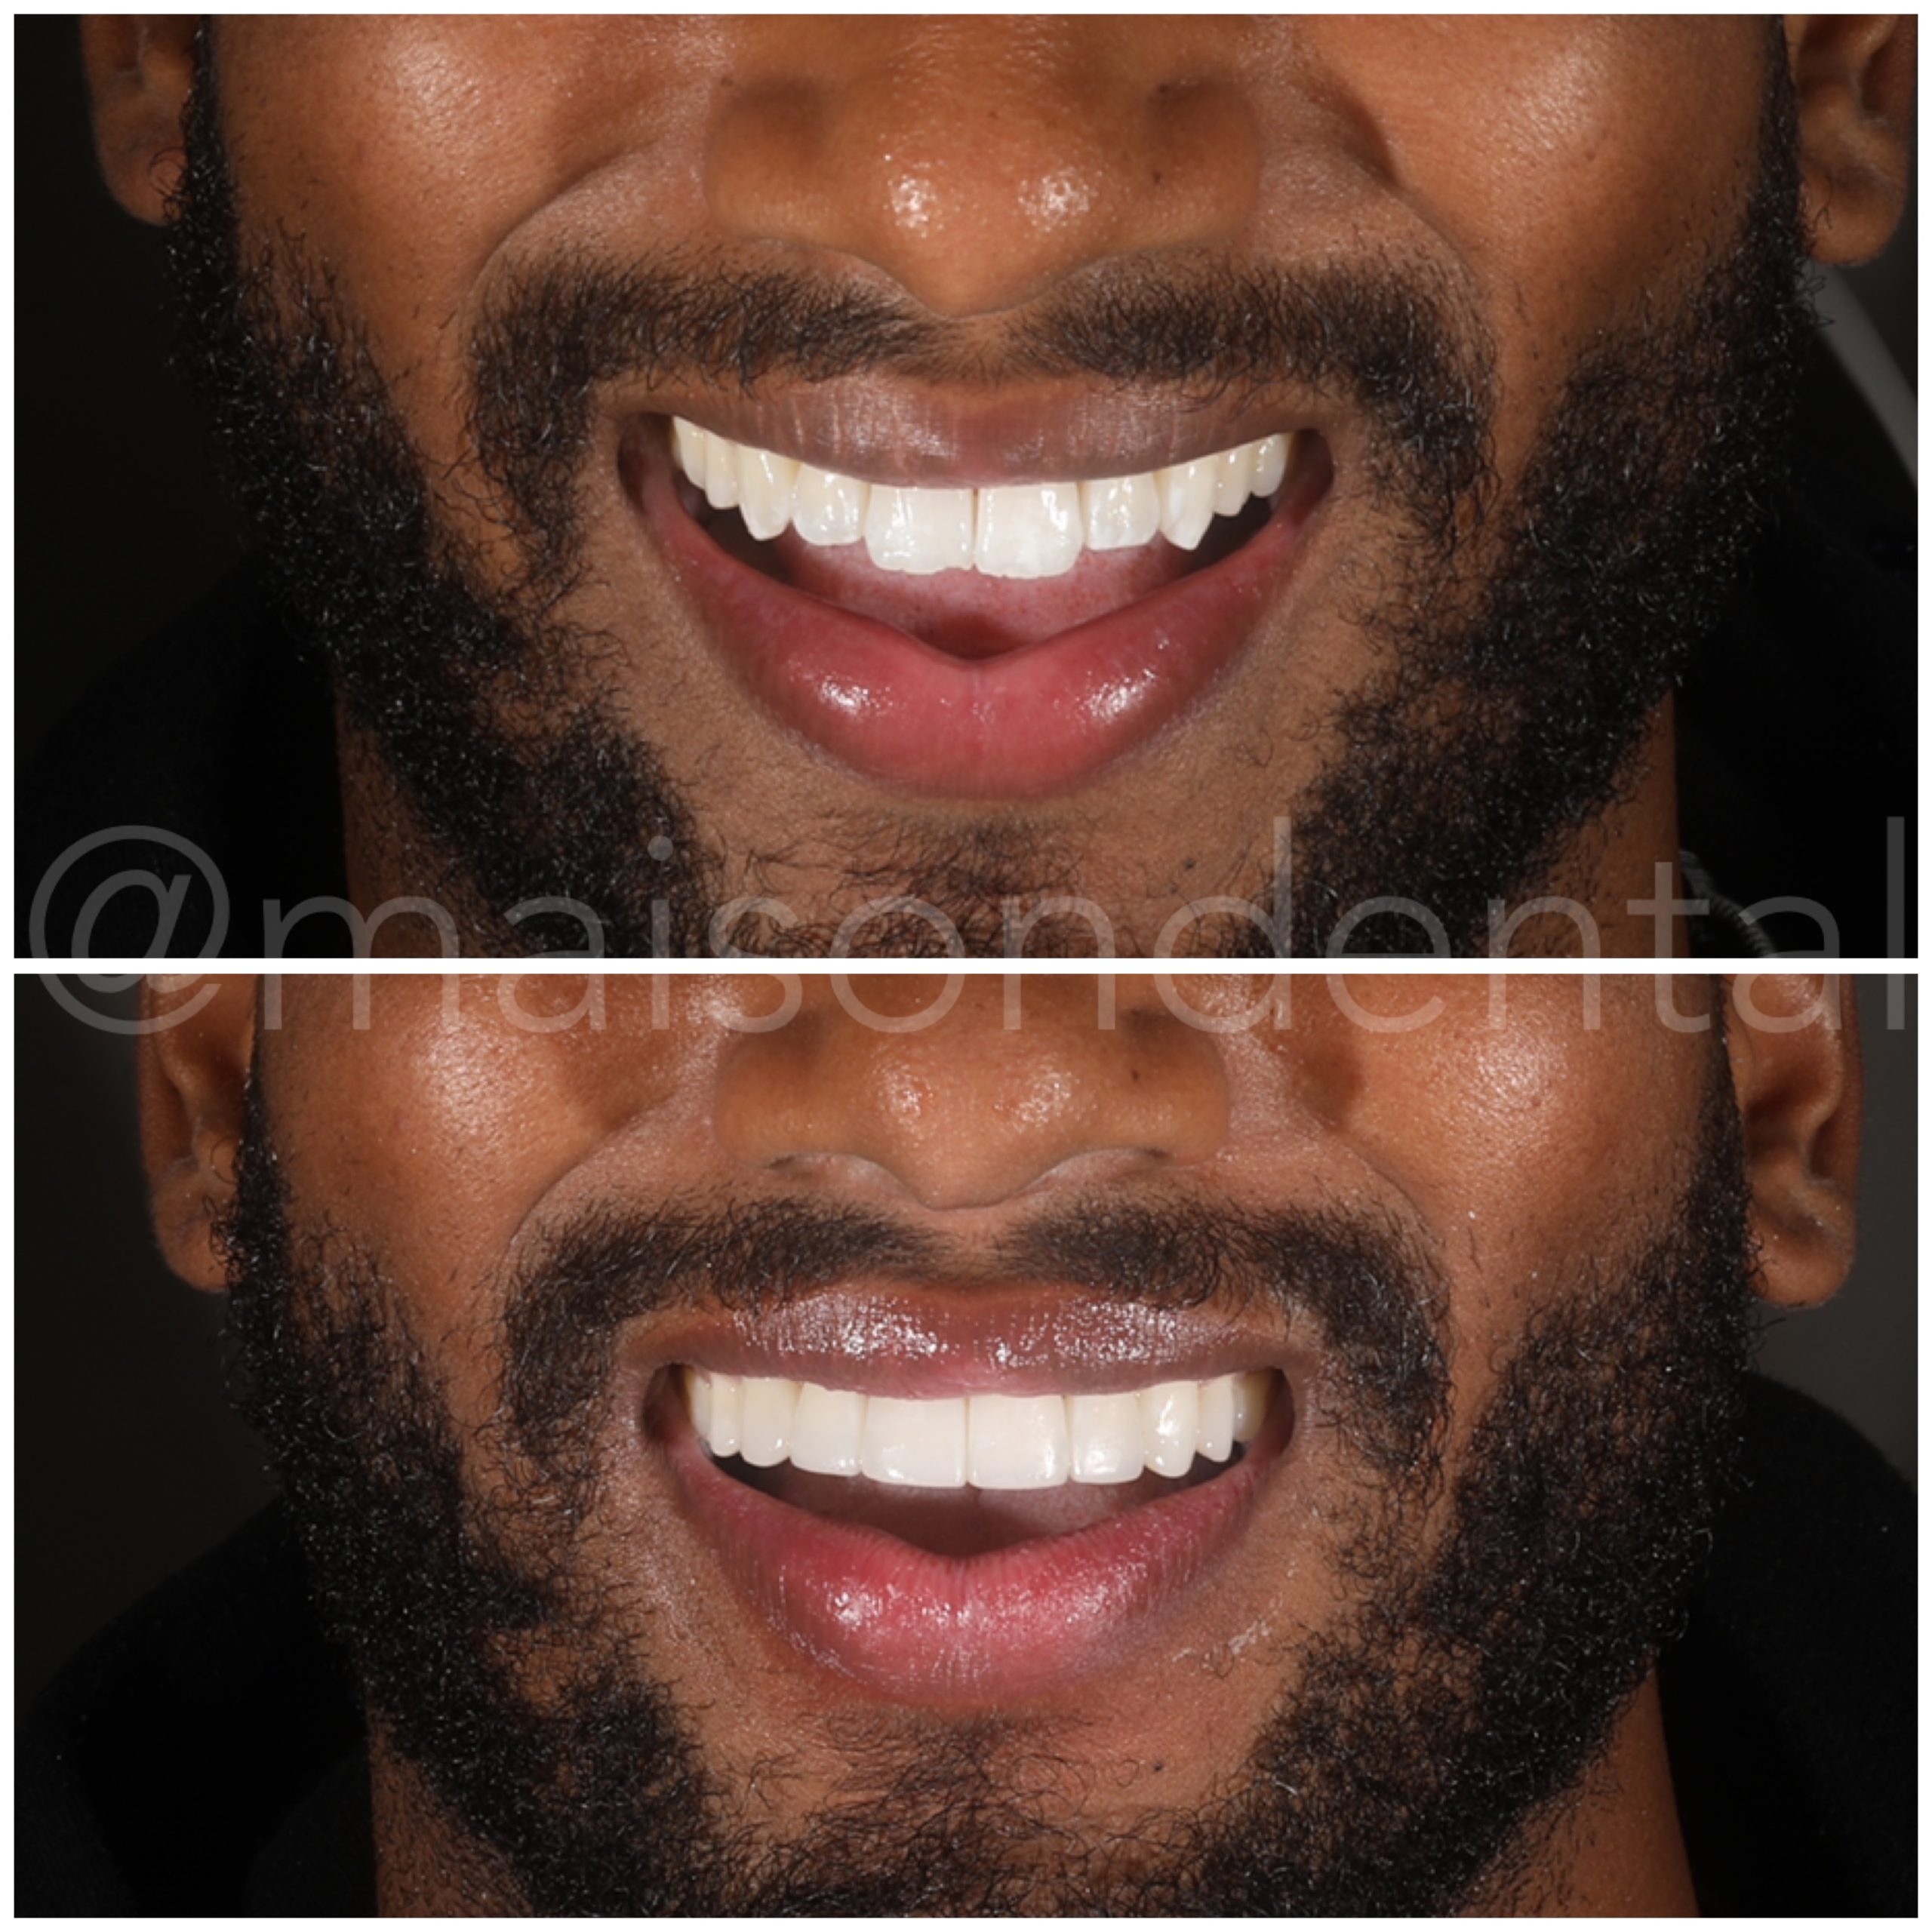 Creating Even Lengths of the Teeth and Producing an Overall More Symmetrical Smile